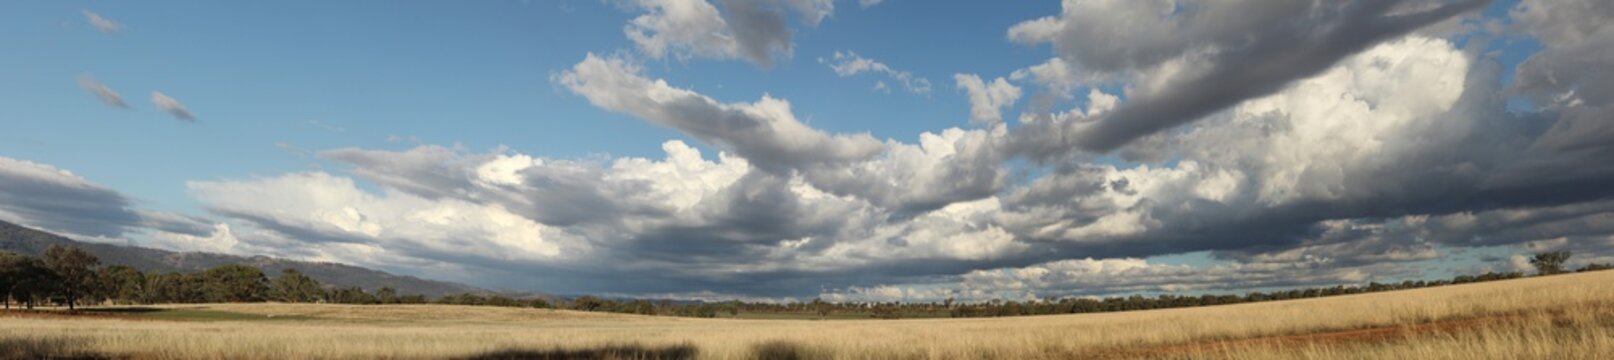 Panoramic view of large open dry drought affected farm fields under stretching cloud filled blue skies over properties in rural New South Wales, Australia